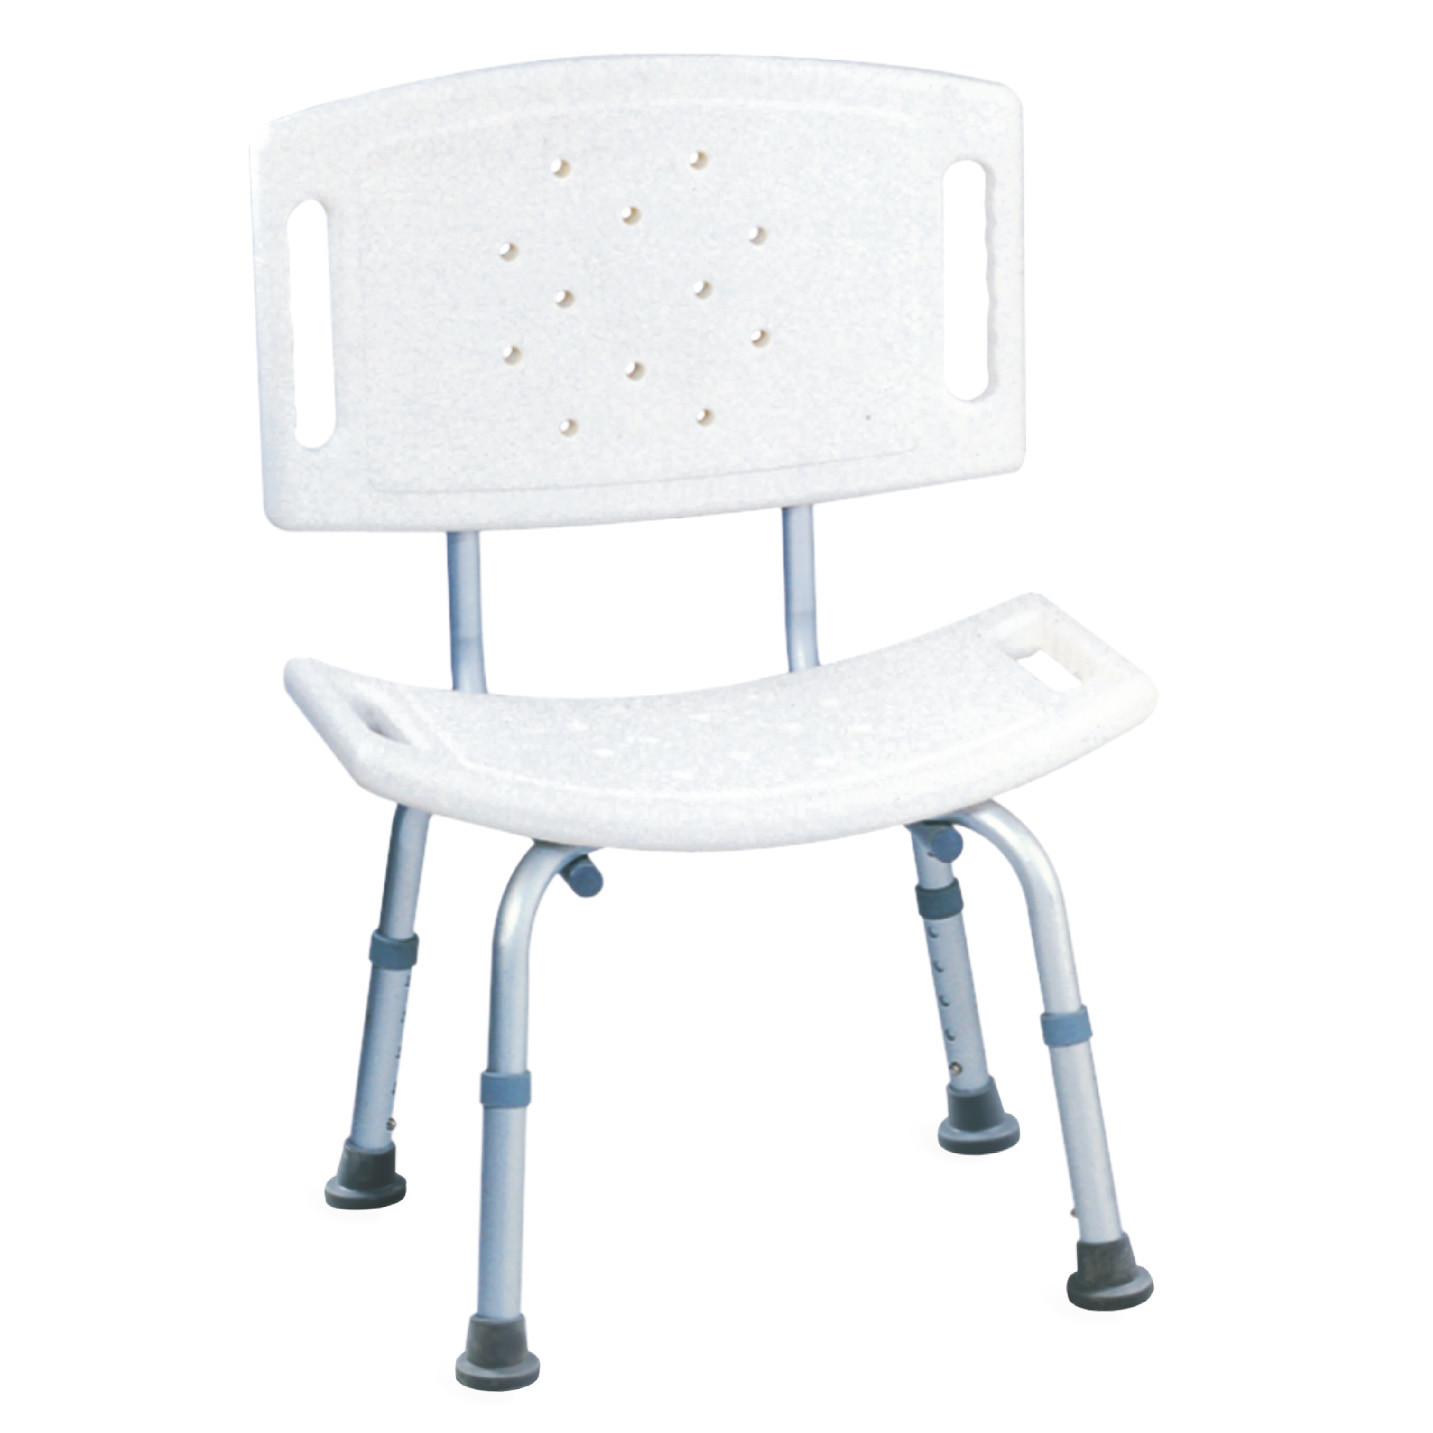 China Aluminum Swivel Bath Transfer Bench ISO Shower Chair With Transfer Bench 4pcs/Ctn factory